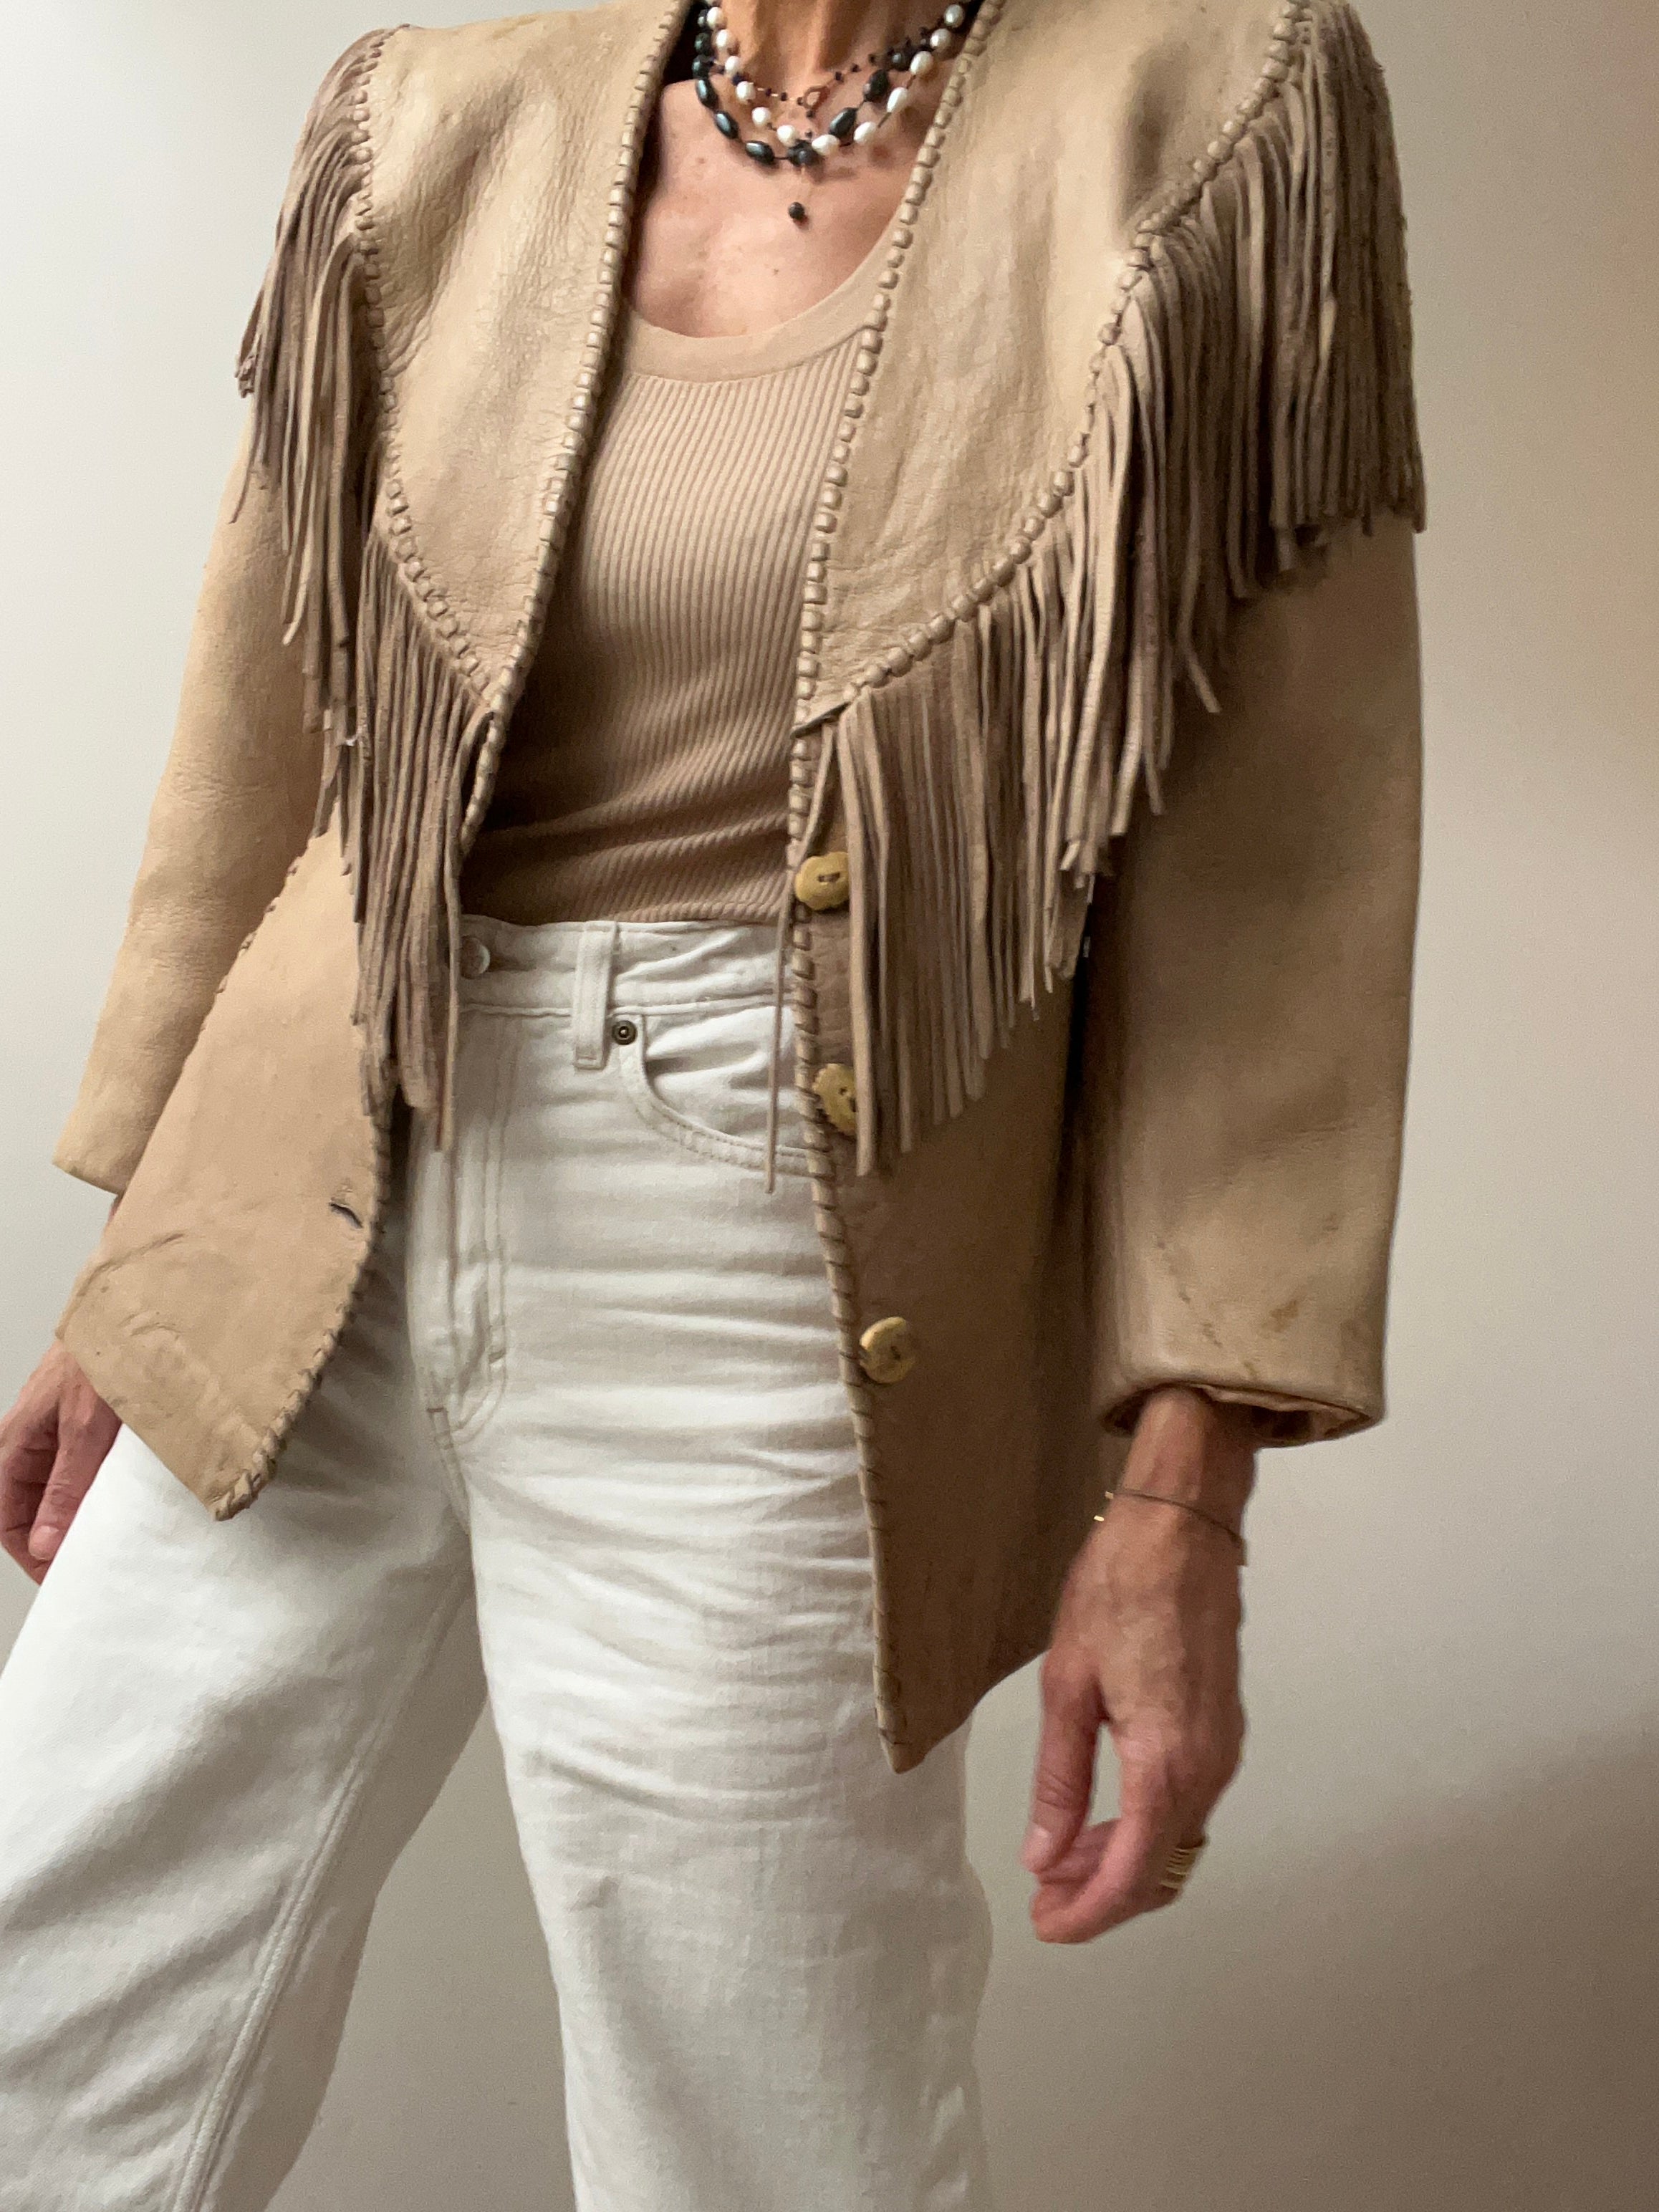 Not specified Jackets Small Tan Tassel Laced Leather Jacket